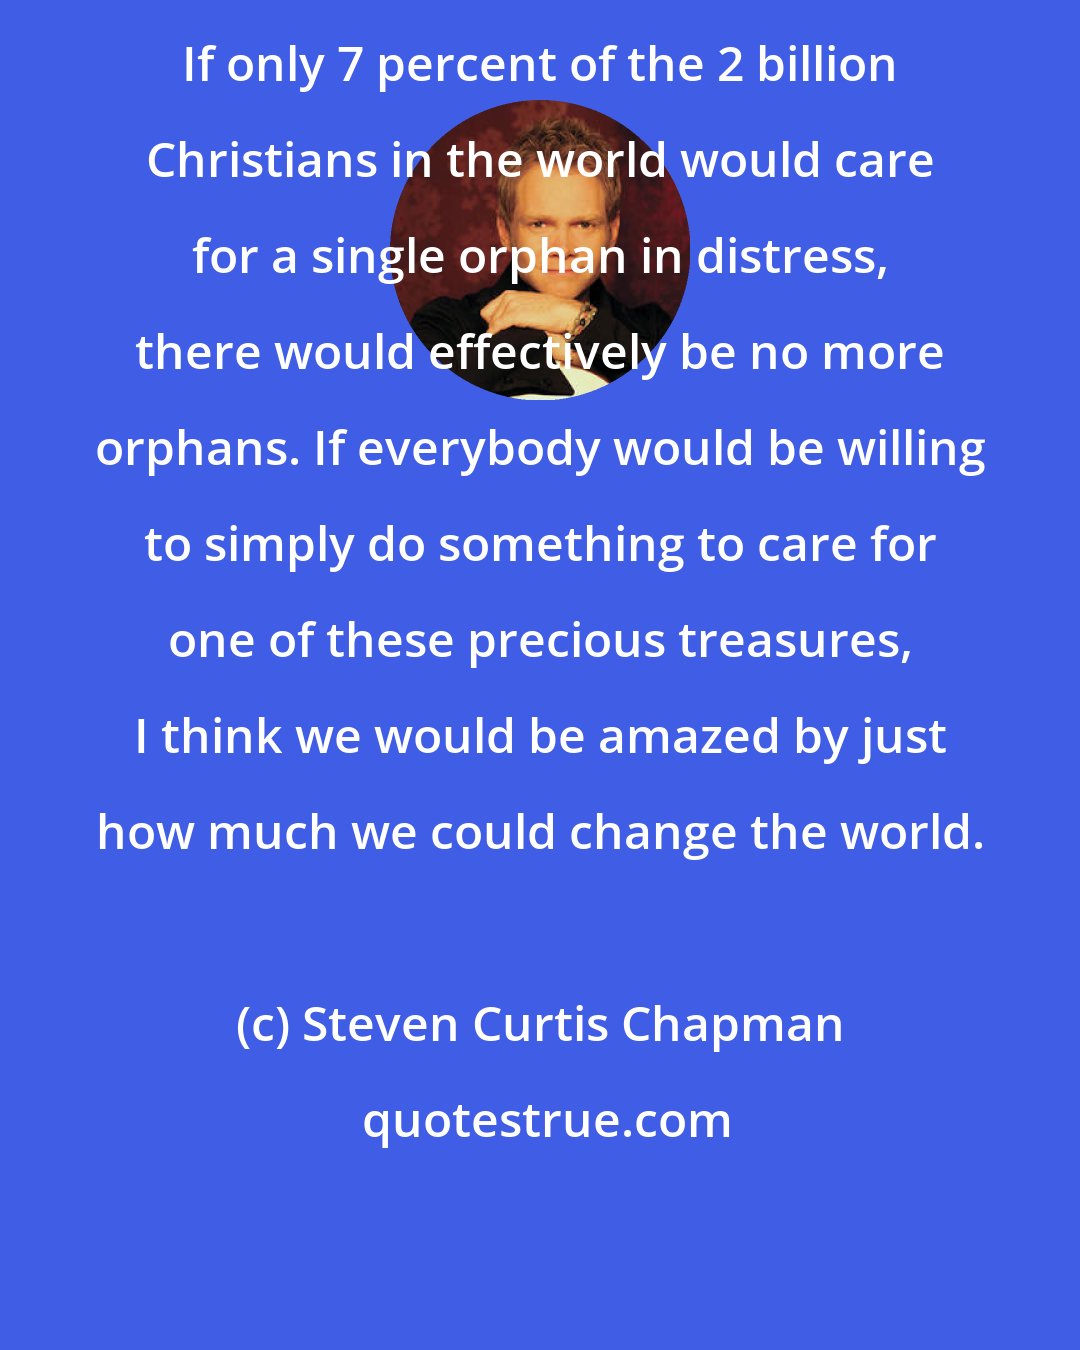 Steven Curtis Chapman: If only 7 percent of the 2 billion Christians in the world would care for a single orphan in distress, there would effectively be no more orphans. If everybody would be willing to simply do something to care for one of these precious treasures, I think we would be amazed by just how much we could change the world.